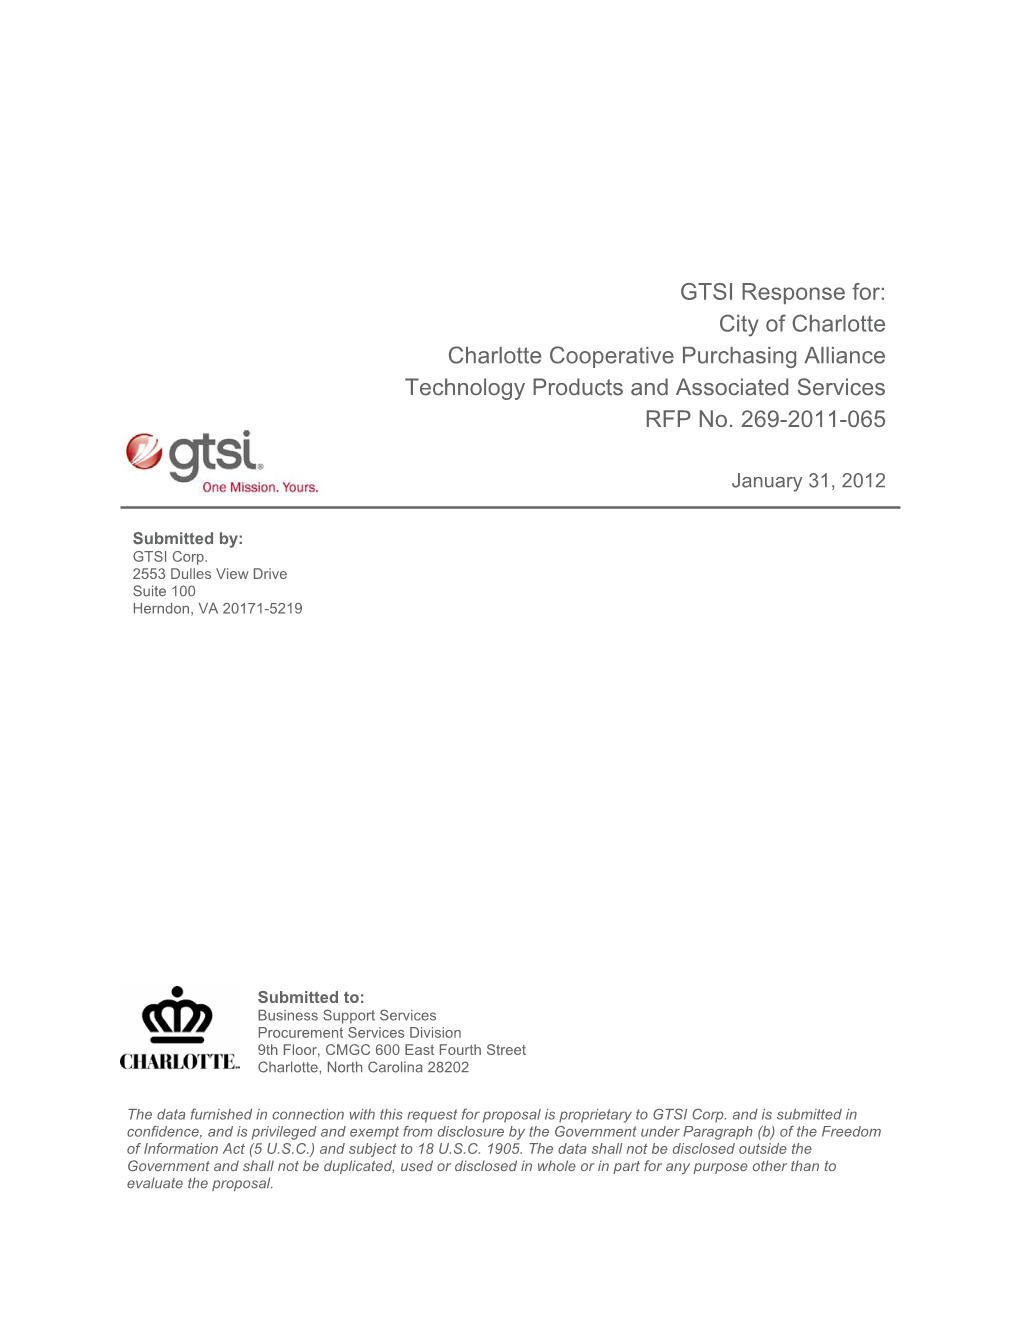 GTSI Response For: City of Charlotte Charlotte Cooperative Purchasing Alliance Technology Products and Associated Services RFP No